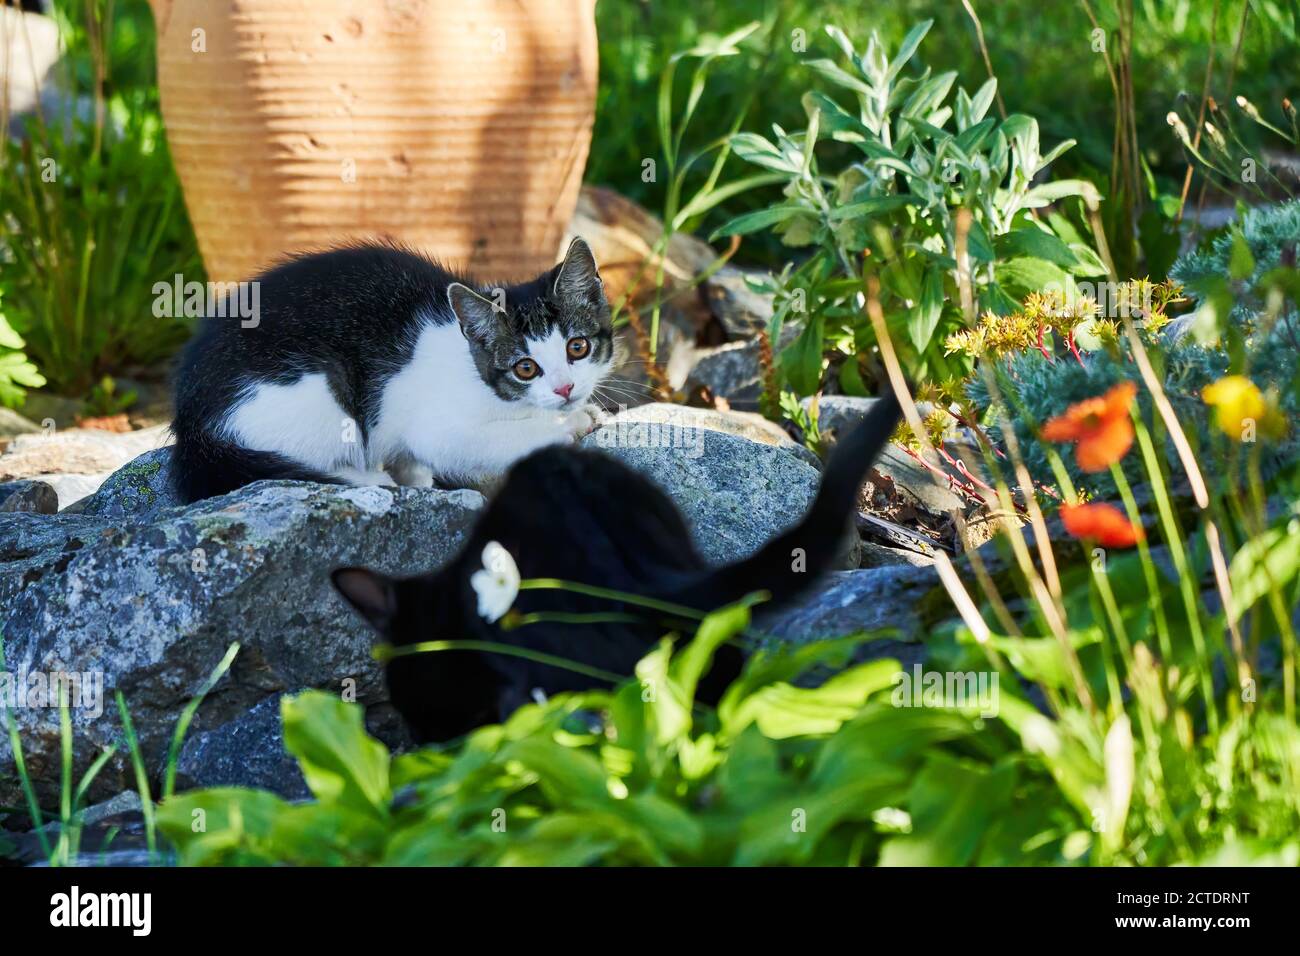 cute little kitten is sitting in the garden and watching his black sibling with a curious look Stock Photo